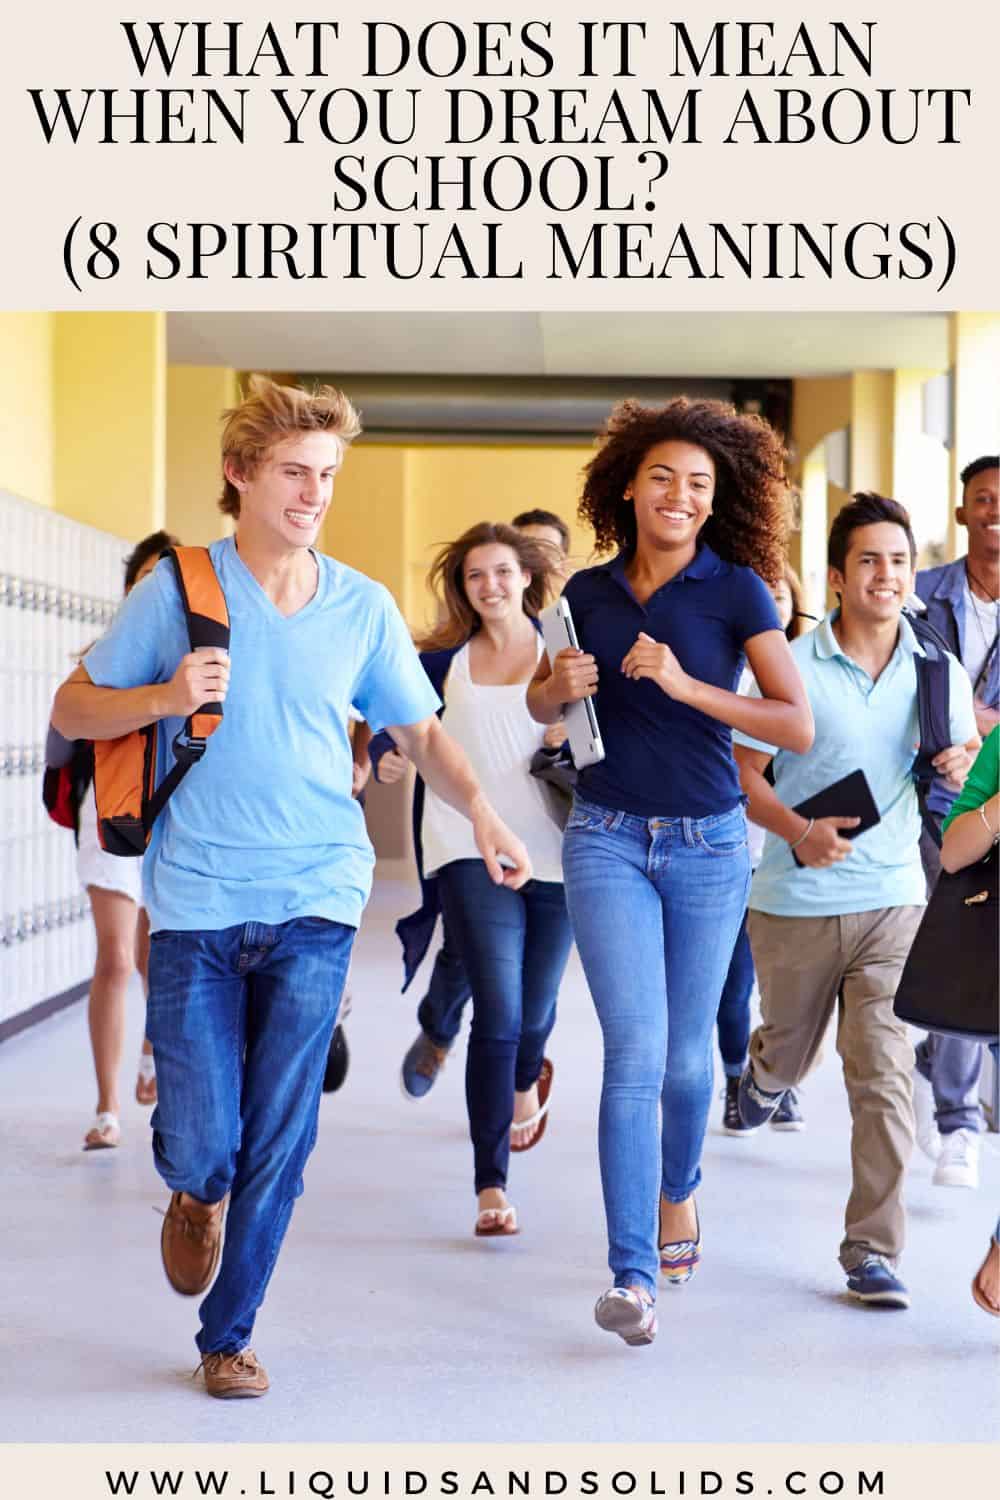 What Does It Mean When You Dream About School? (8 Spiritual Meanings)